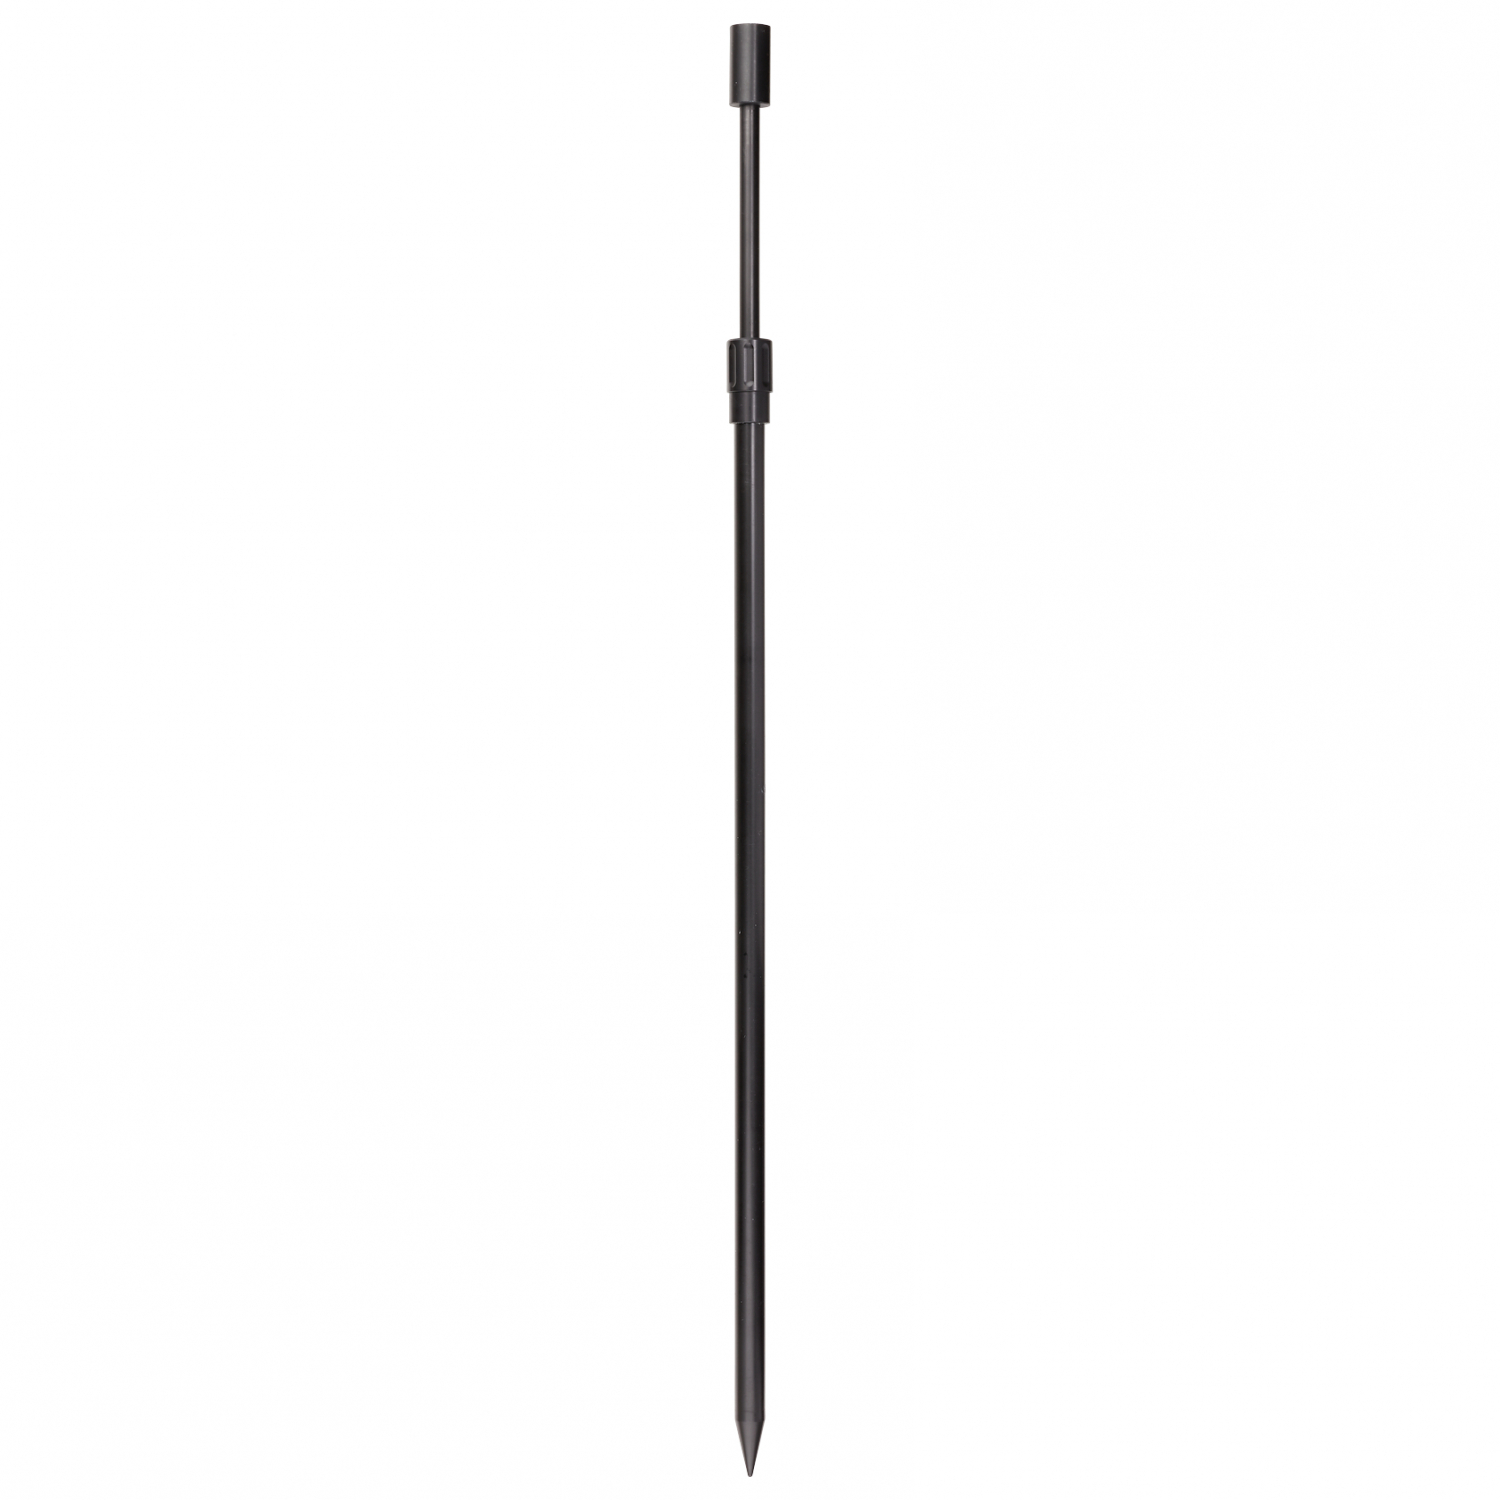 Kogha Universal Rod Stand at low prices